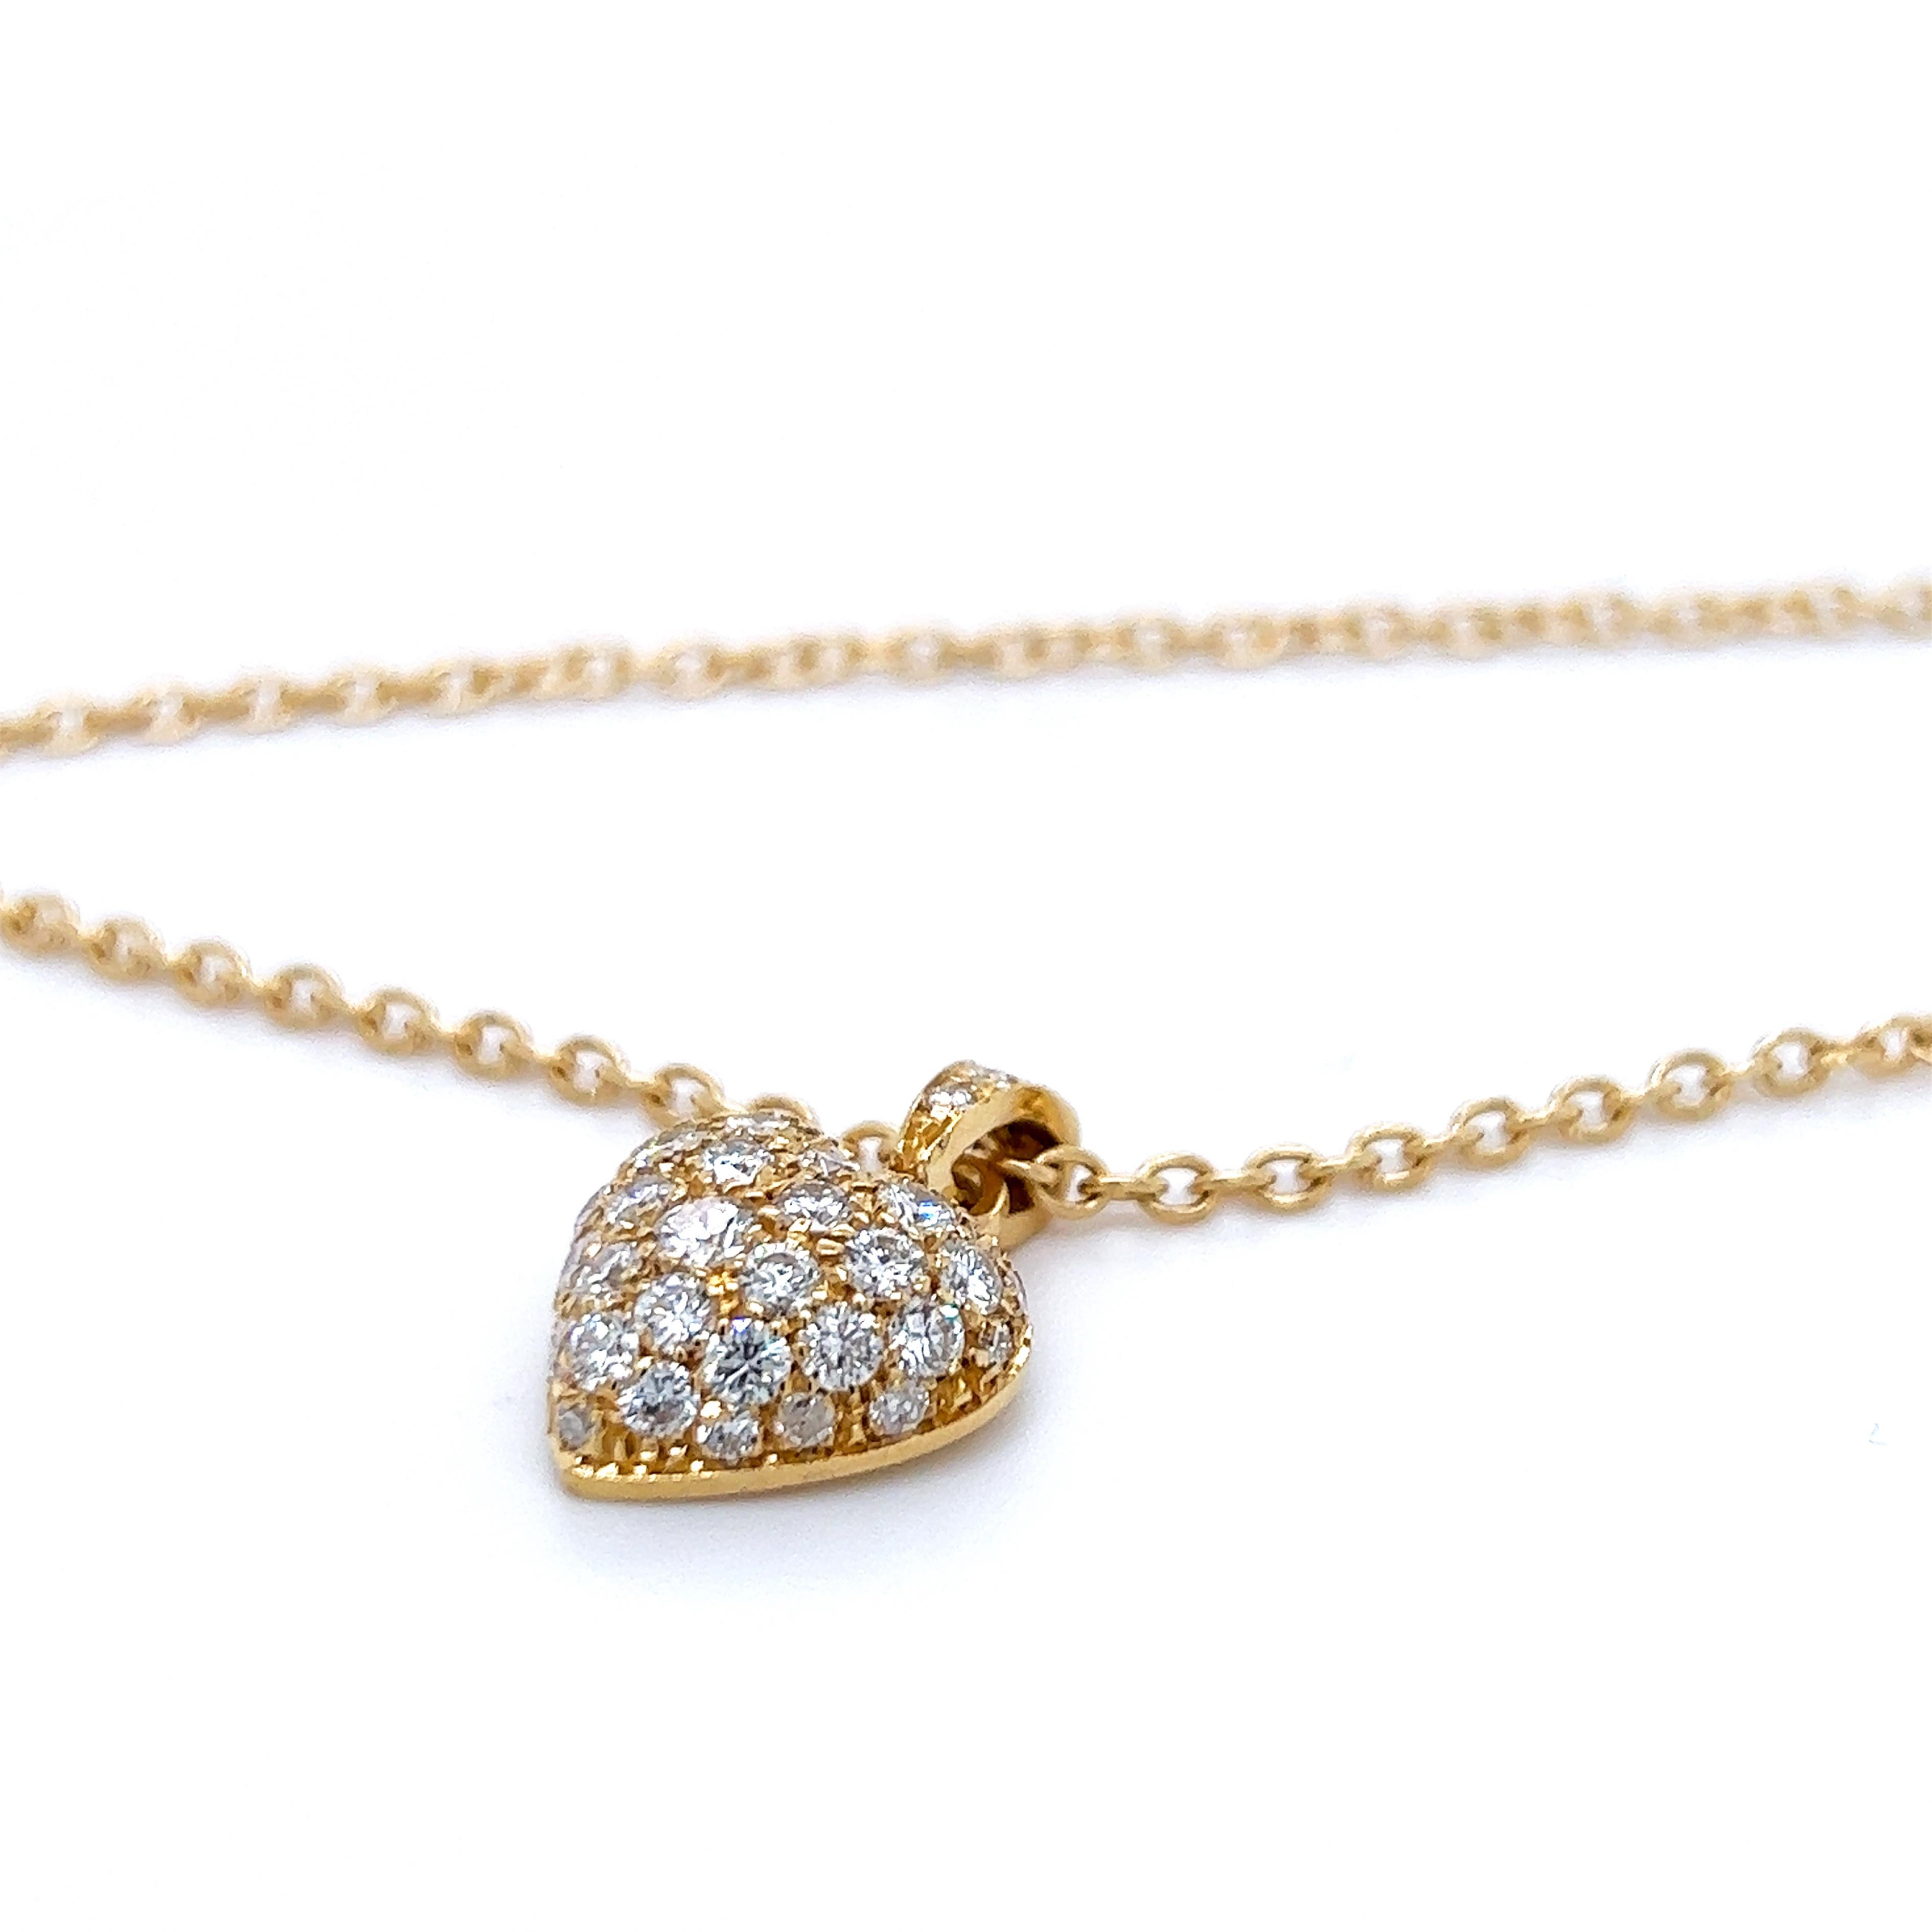 Original 1990, Cartier White Diamond 18Kt Yellow Gold Heart Pendant and Necklace  18.50inches(47cm).
A very precious, iconic Cartier top quality 1.54KT white diamond heart in a simple, all time wearable 18kt yellow gold chain (with double security